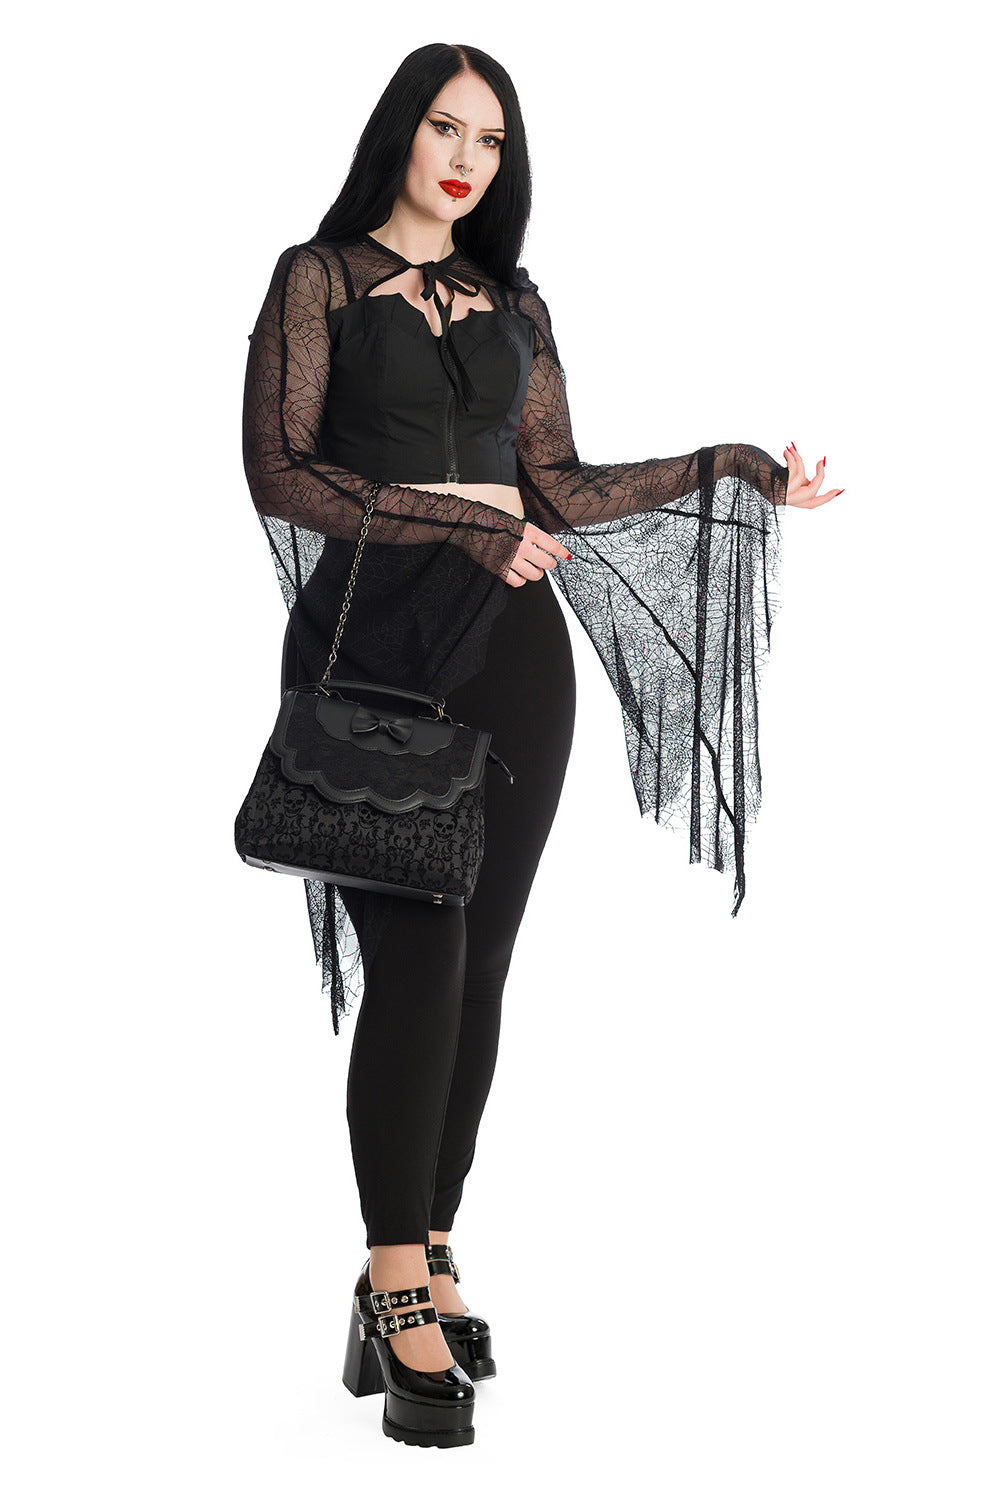 Alternative model wearing a gothic bat wing lace sleeved crop top with high waisted leggings with lace handbag